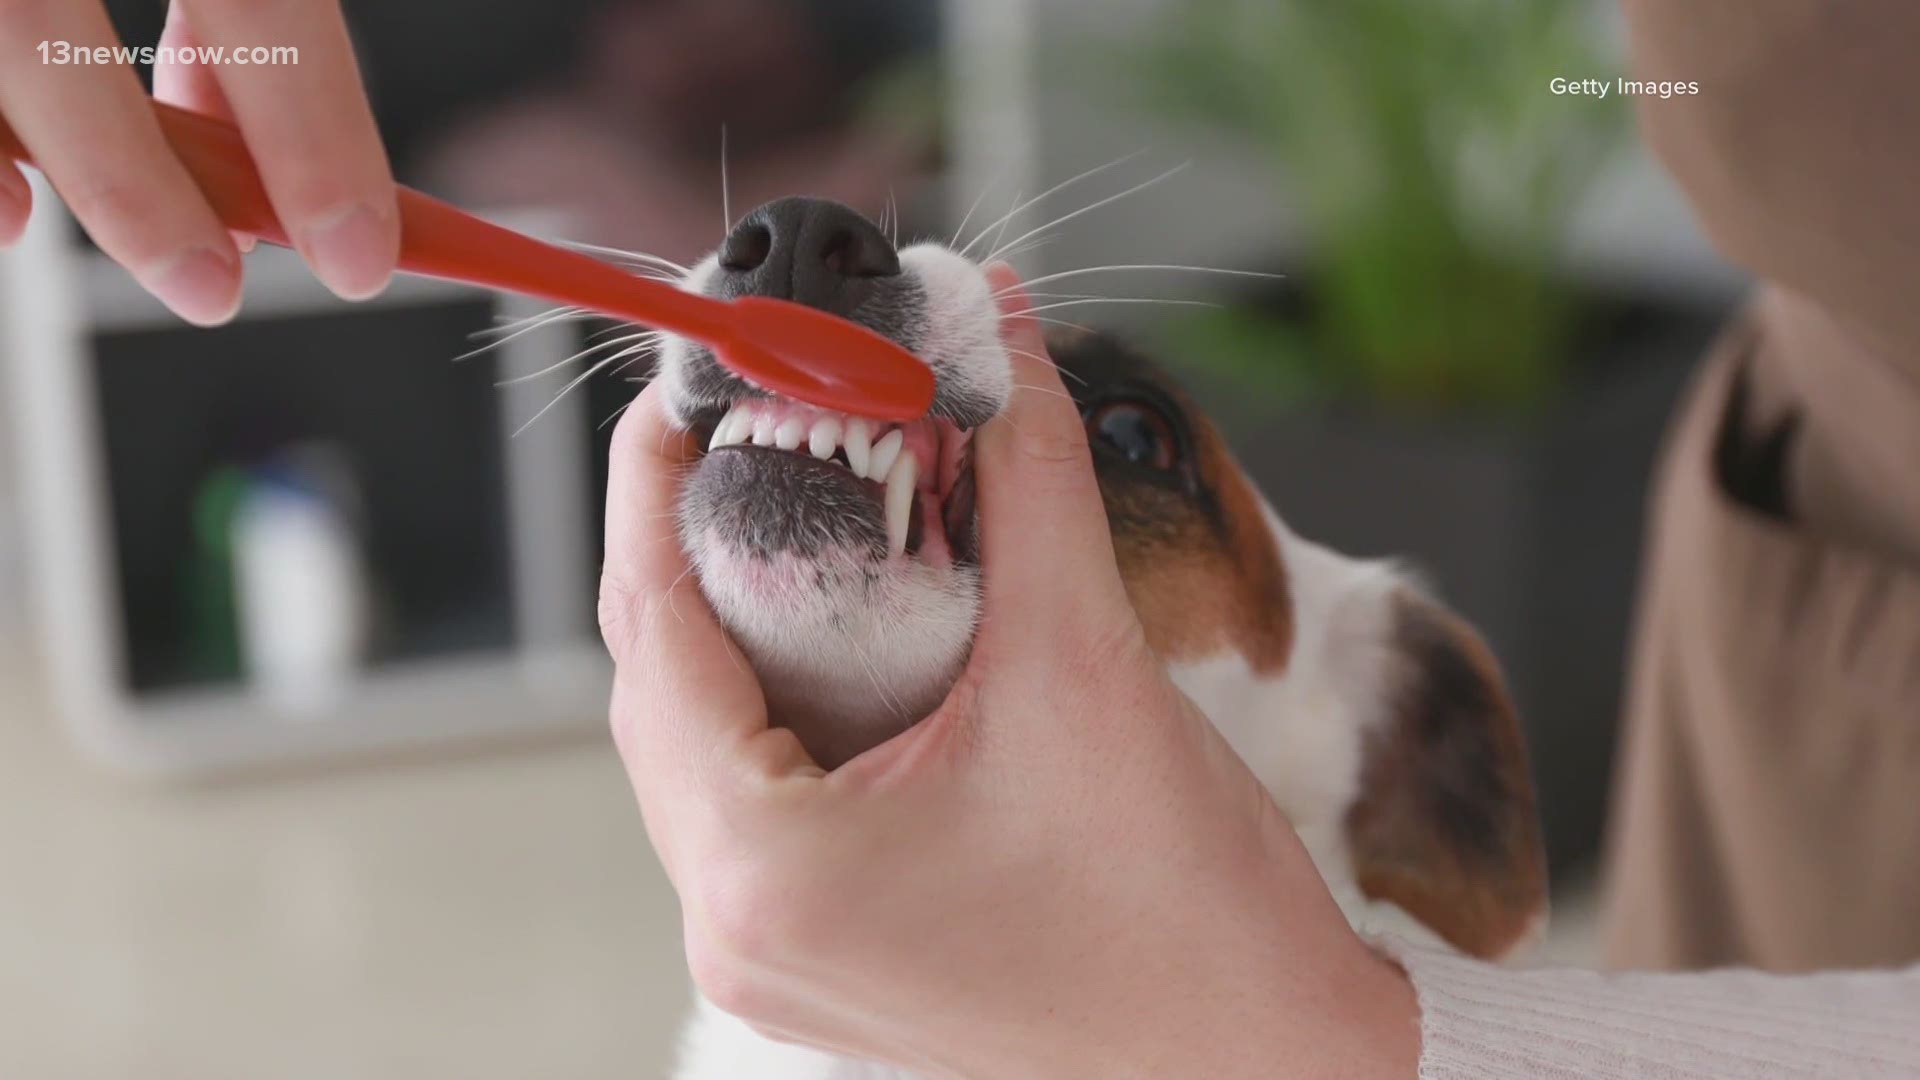 If your pet's mouth smells rank, it's probably time to visit the vet. Between those appointments, be sure to brush their teeth at home!